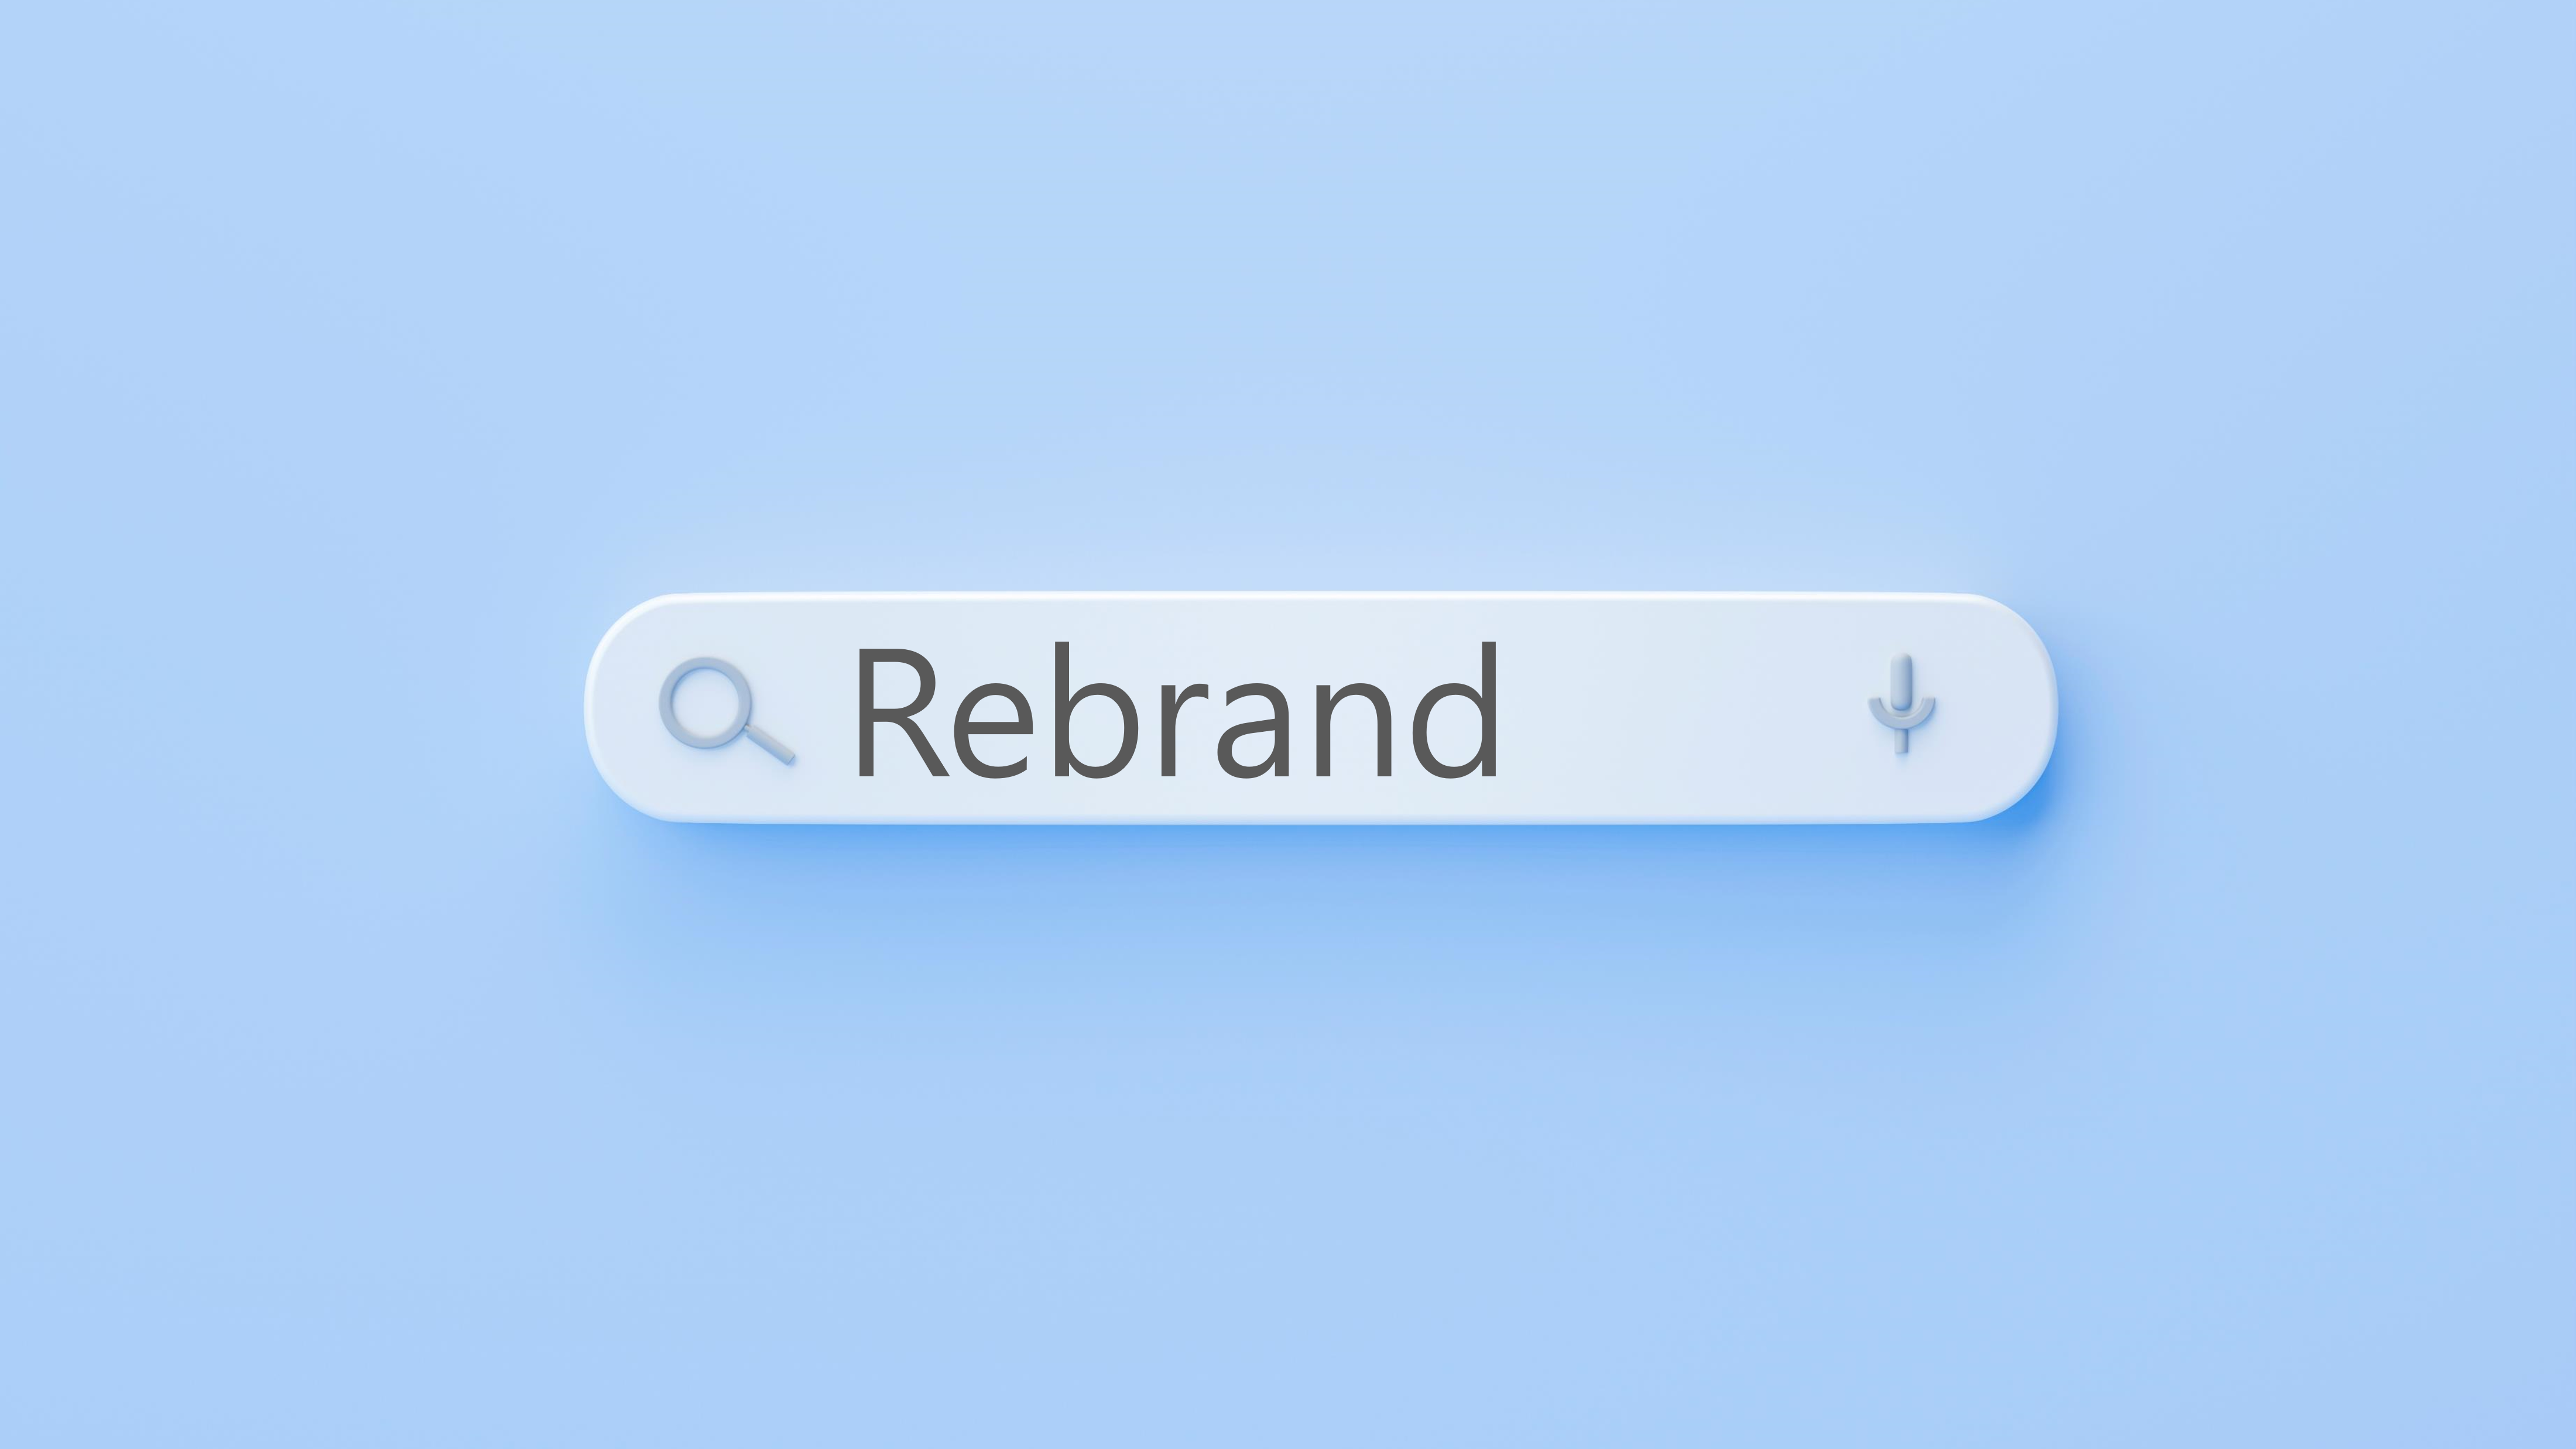 Five steps to help guide your rebrand